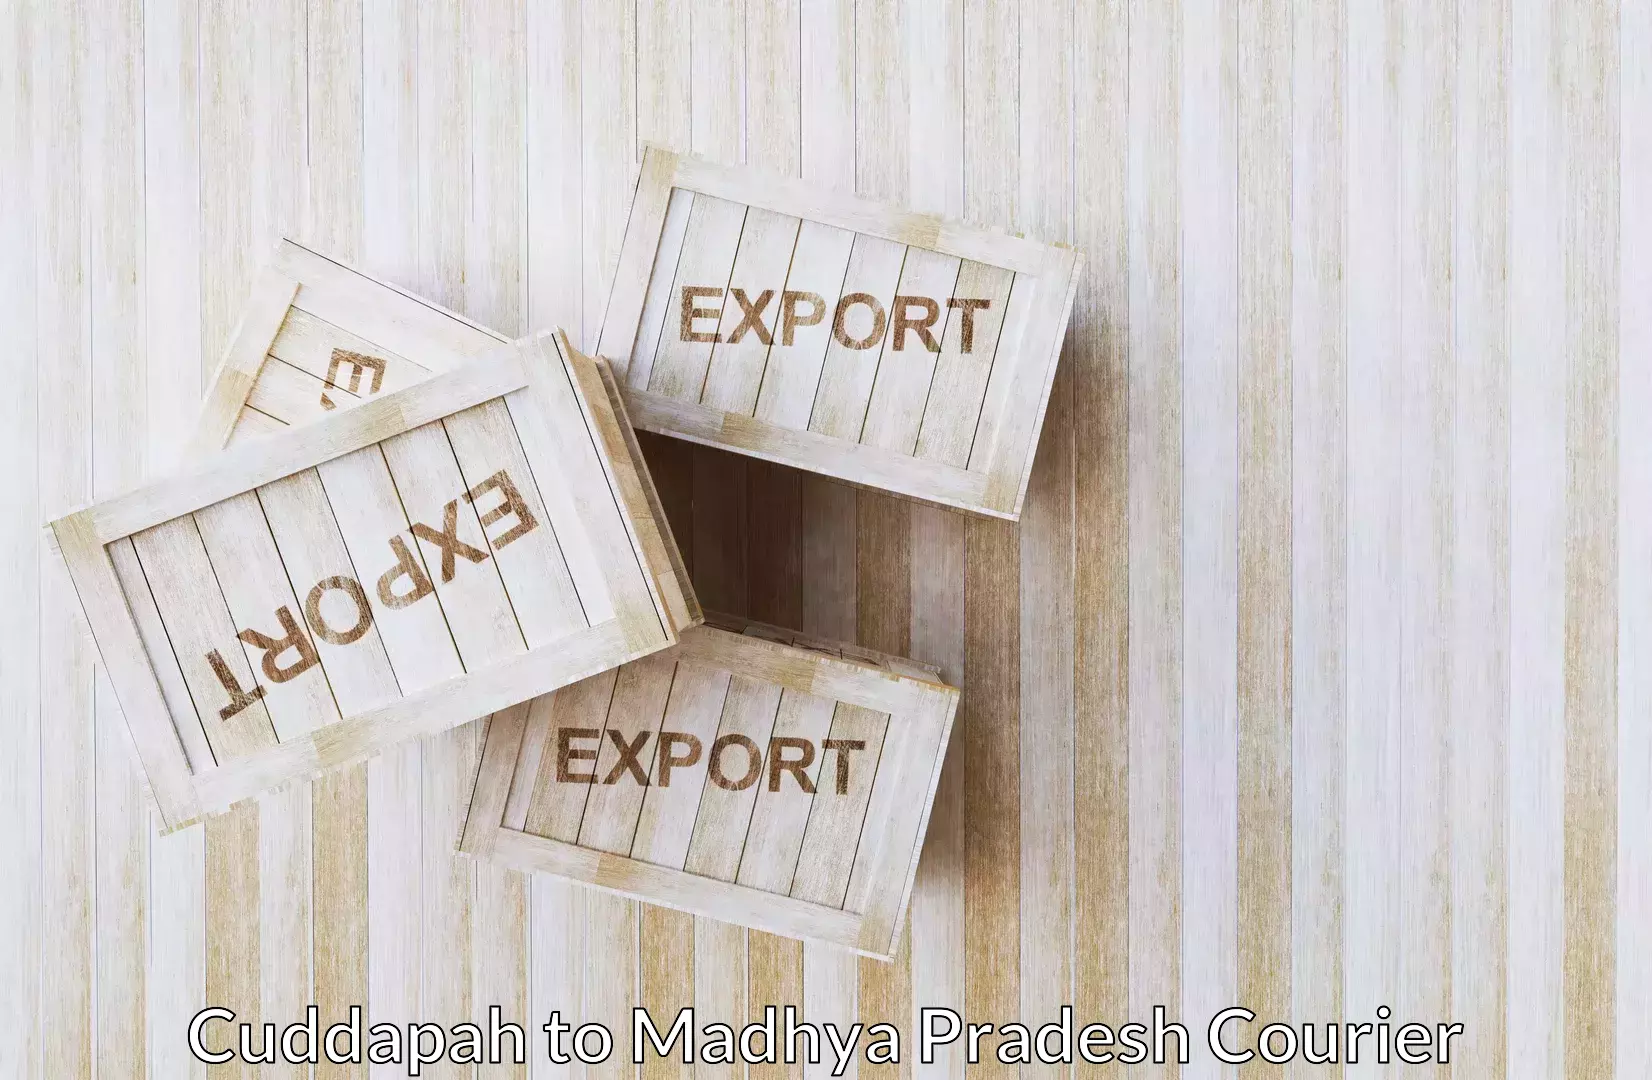 Quality moving and storage Cuddapah to BHEL Bhopal